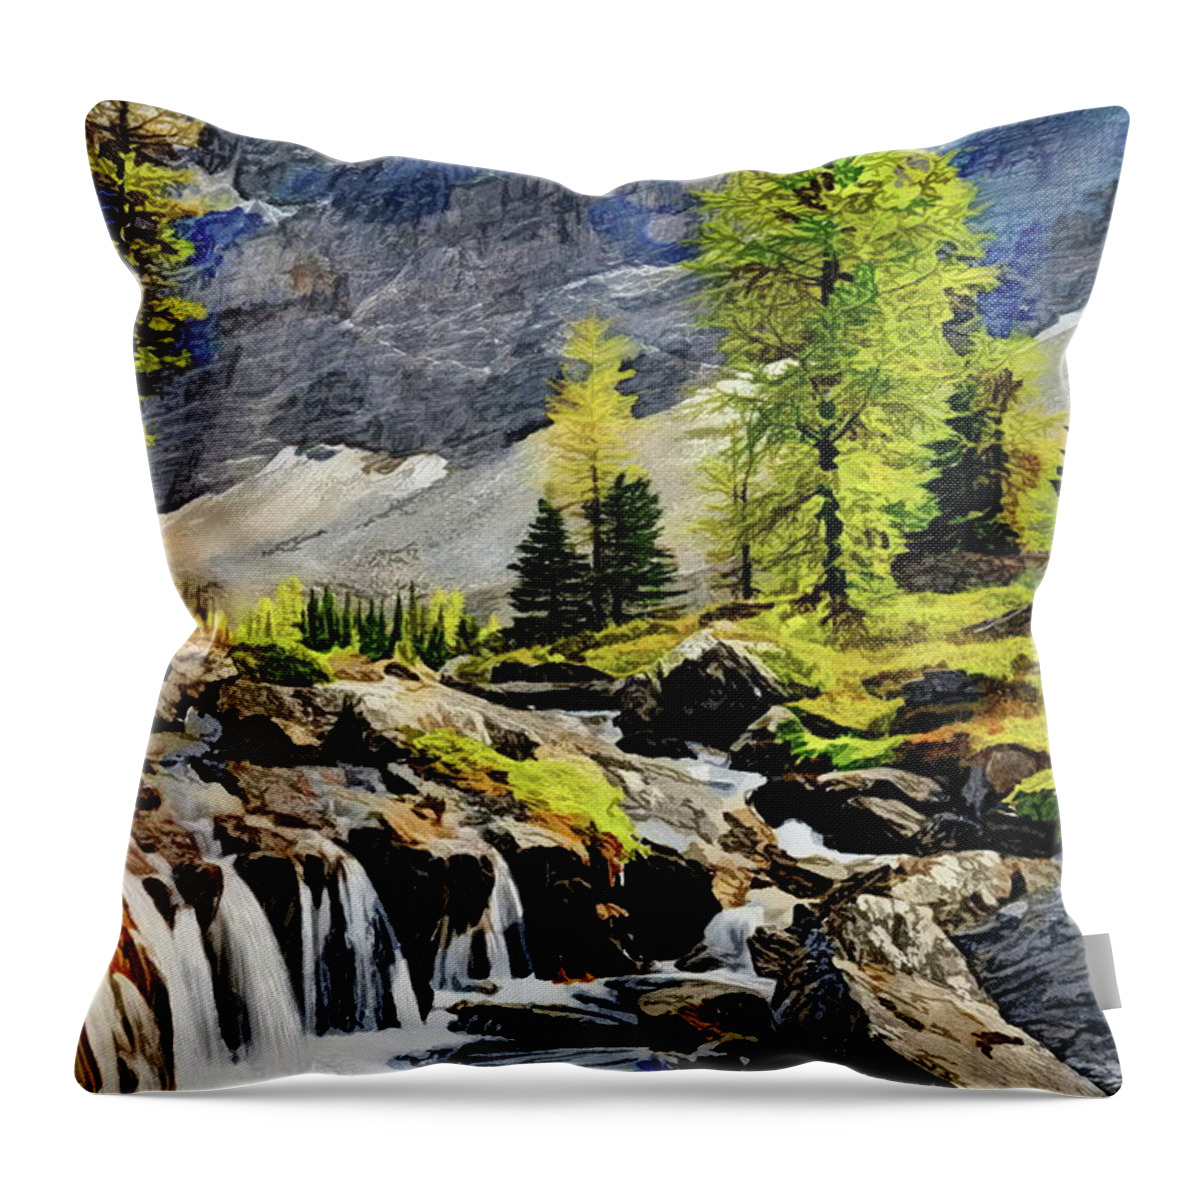 High Throw Pillow featuring the painting Mountain Stream by Russ Harris